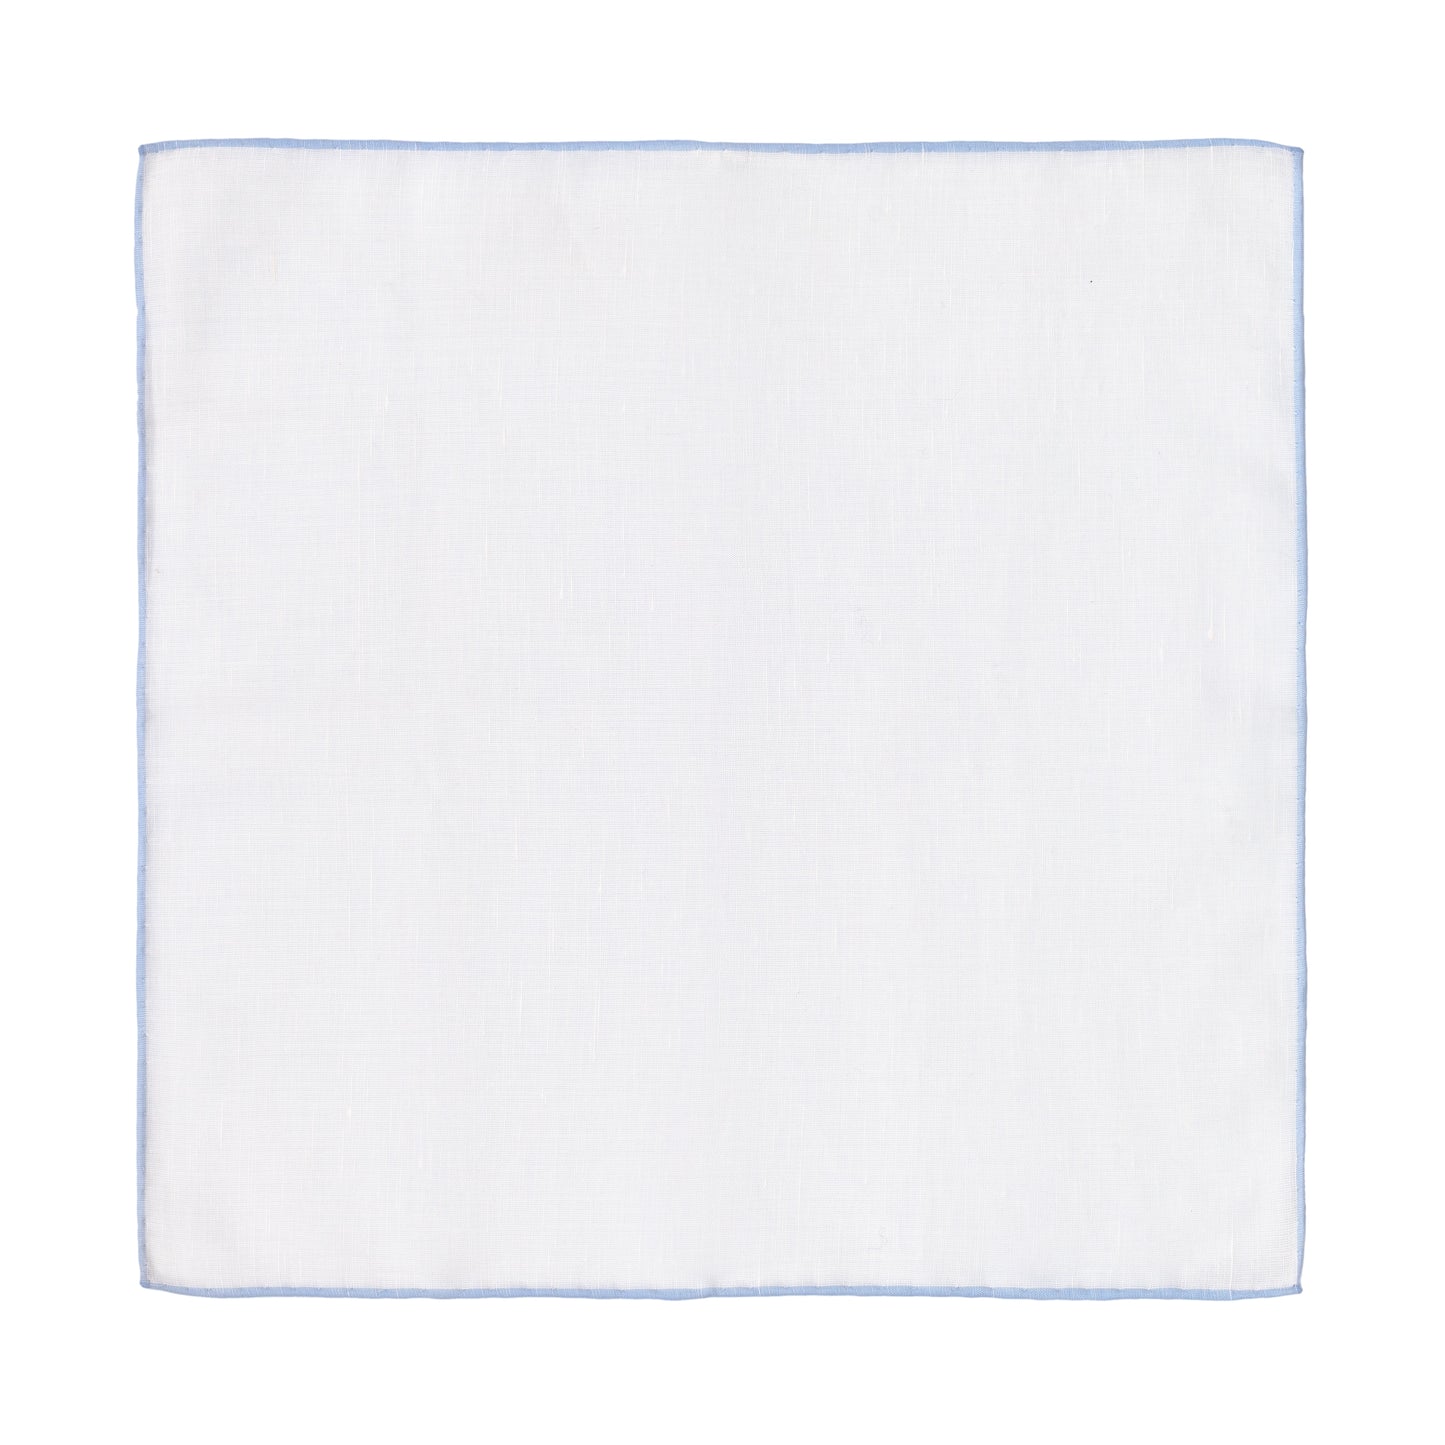 Cotton Blend Pocket Square in White with Blue Edges